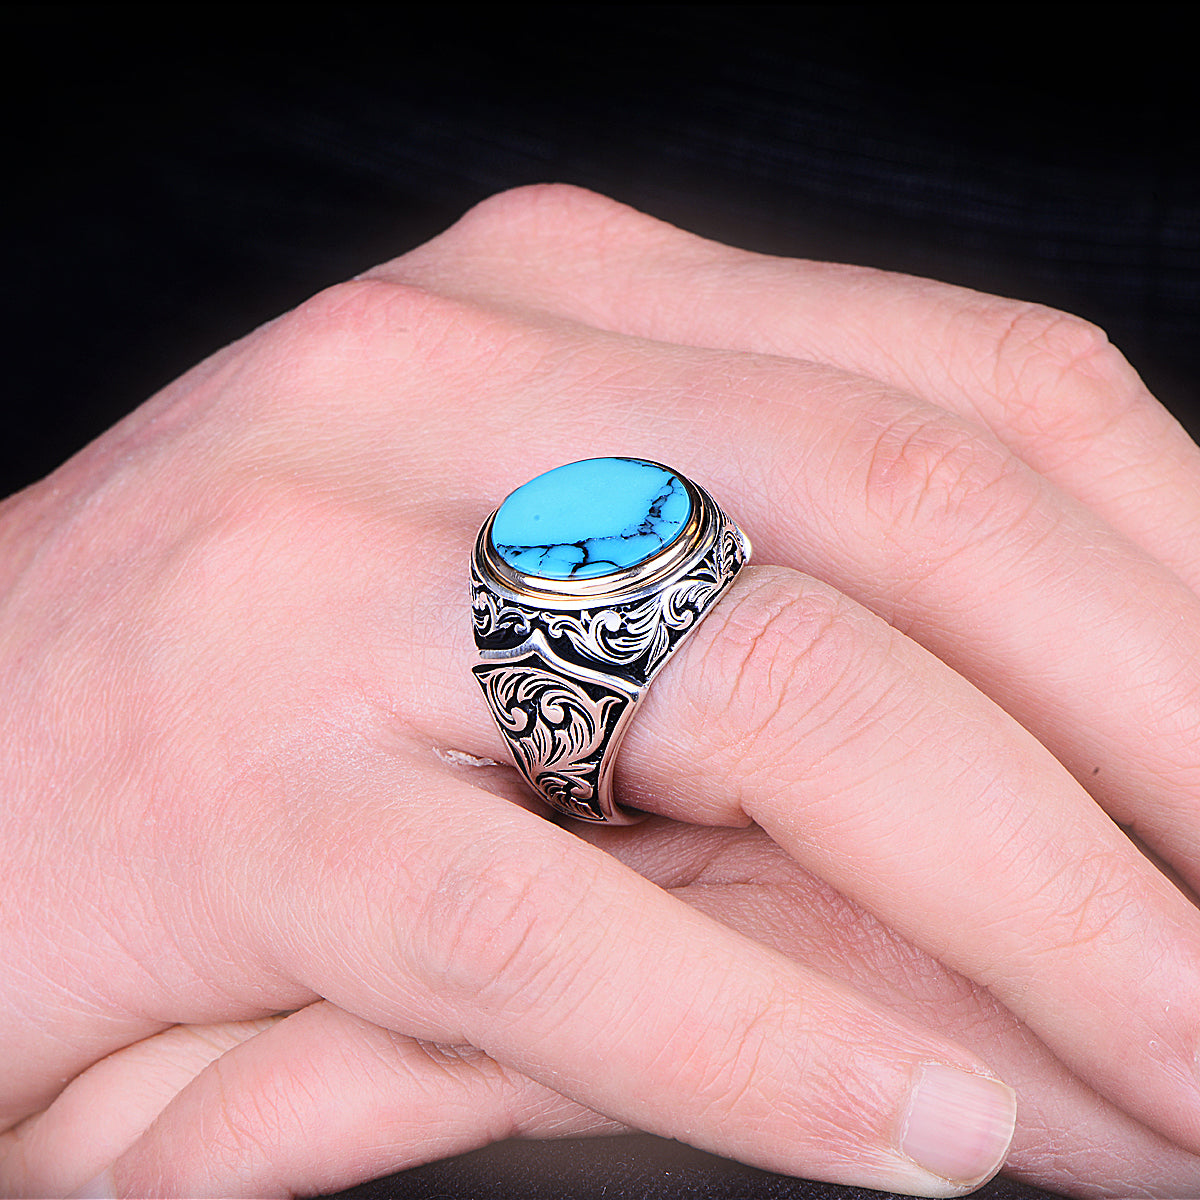 Silver Handmade Engraved Round Turquoise Stone Ring